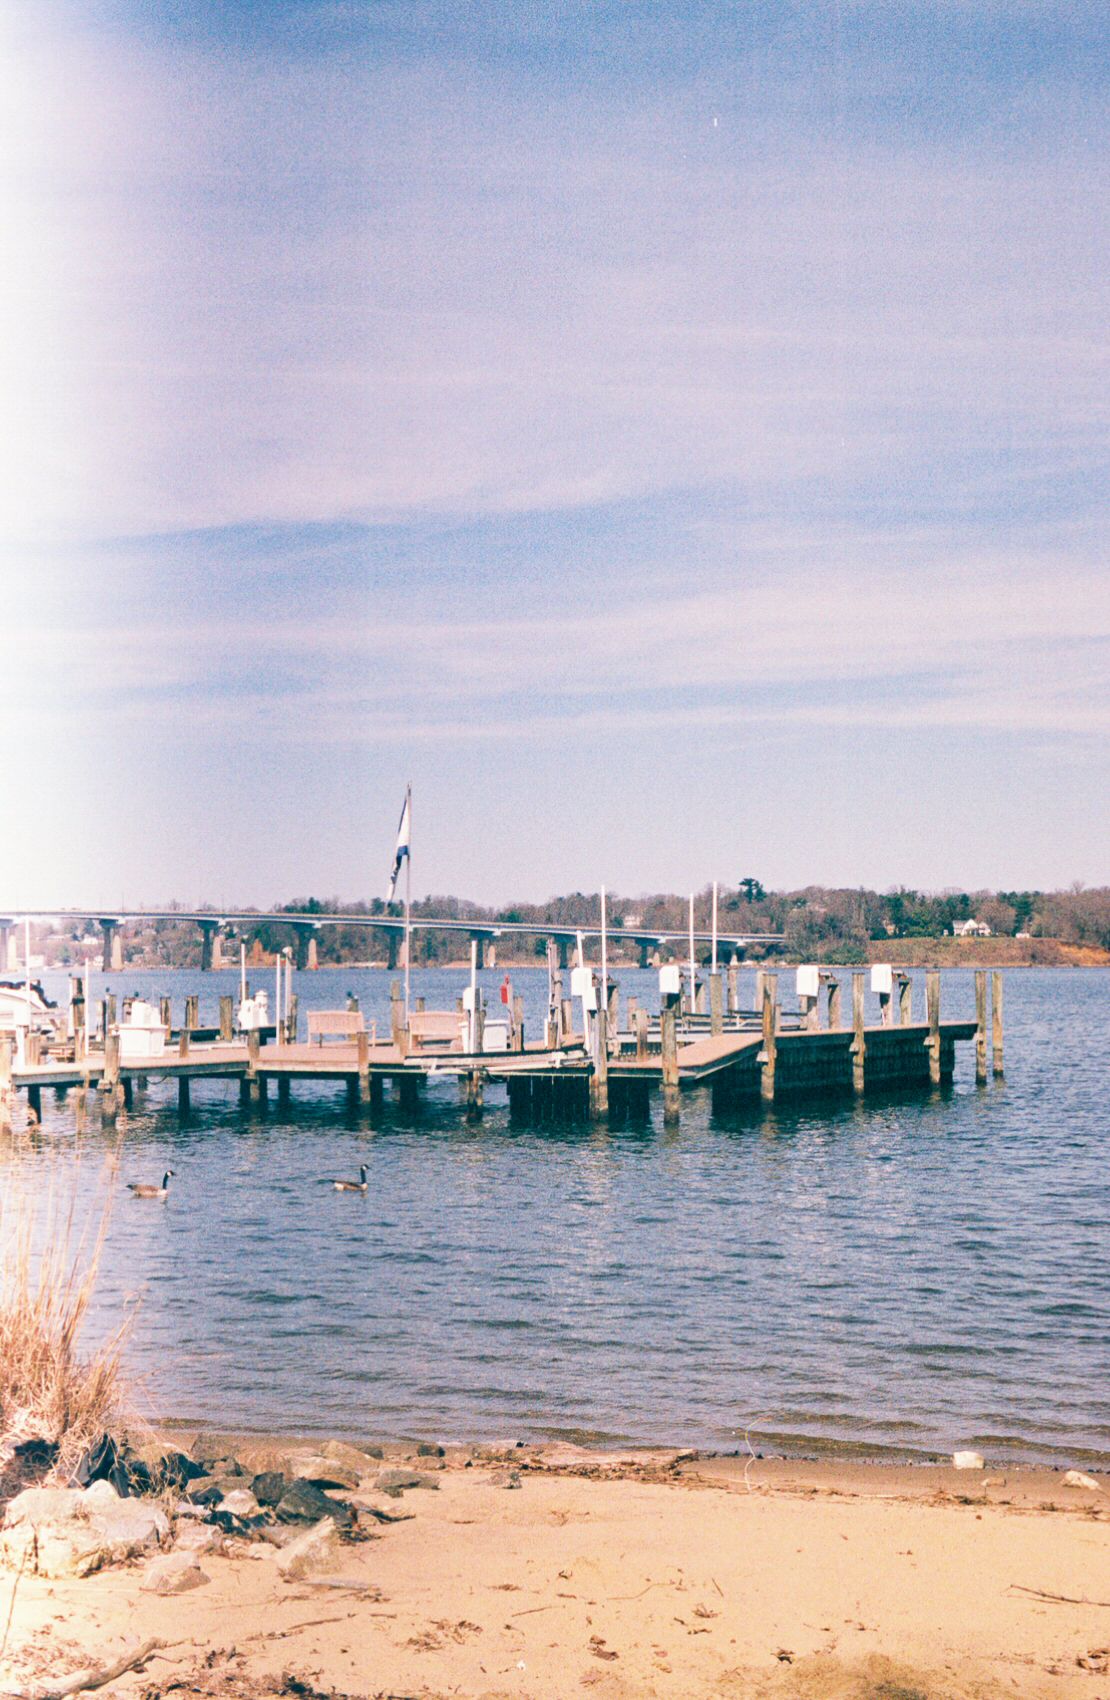 35mm film photograph of wooden dock on Severn River in Annapolis, Maryland